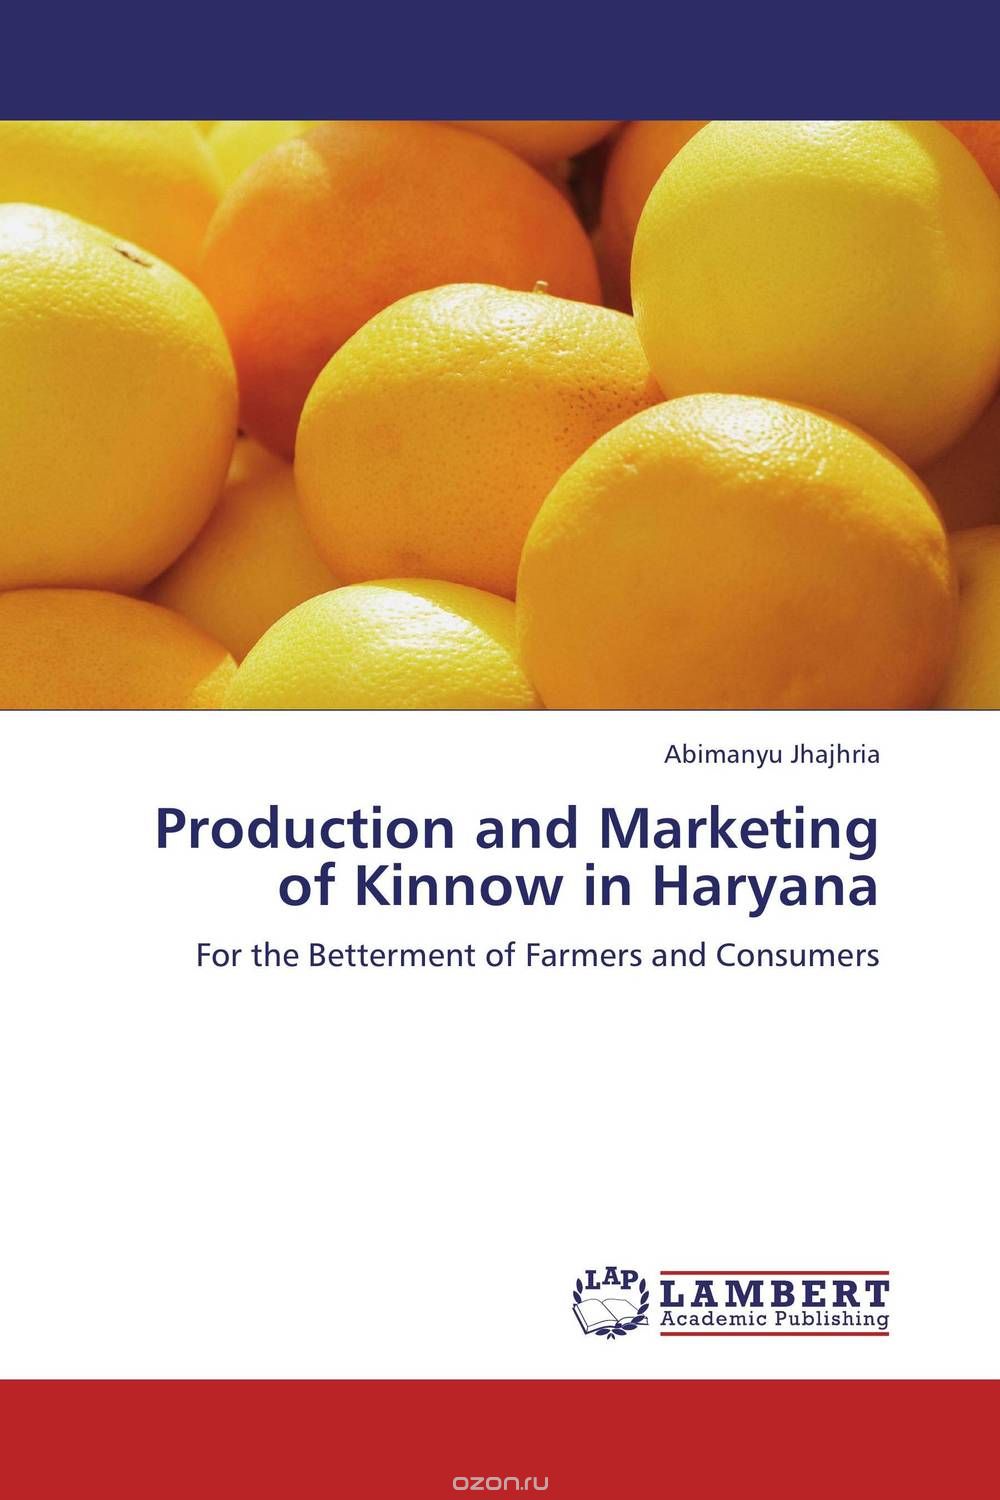 Production and Marketing of Kinnow in Haryana